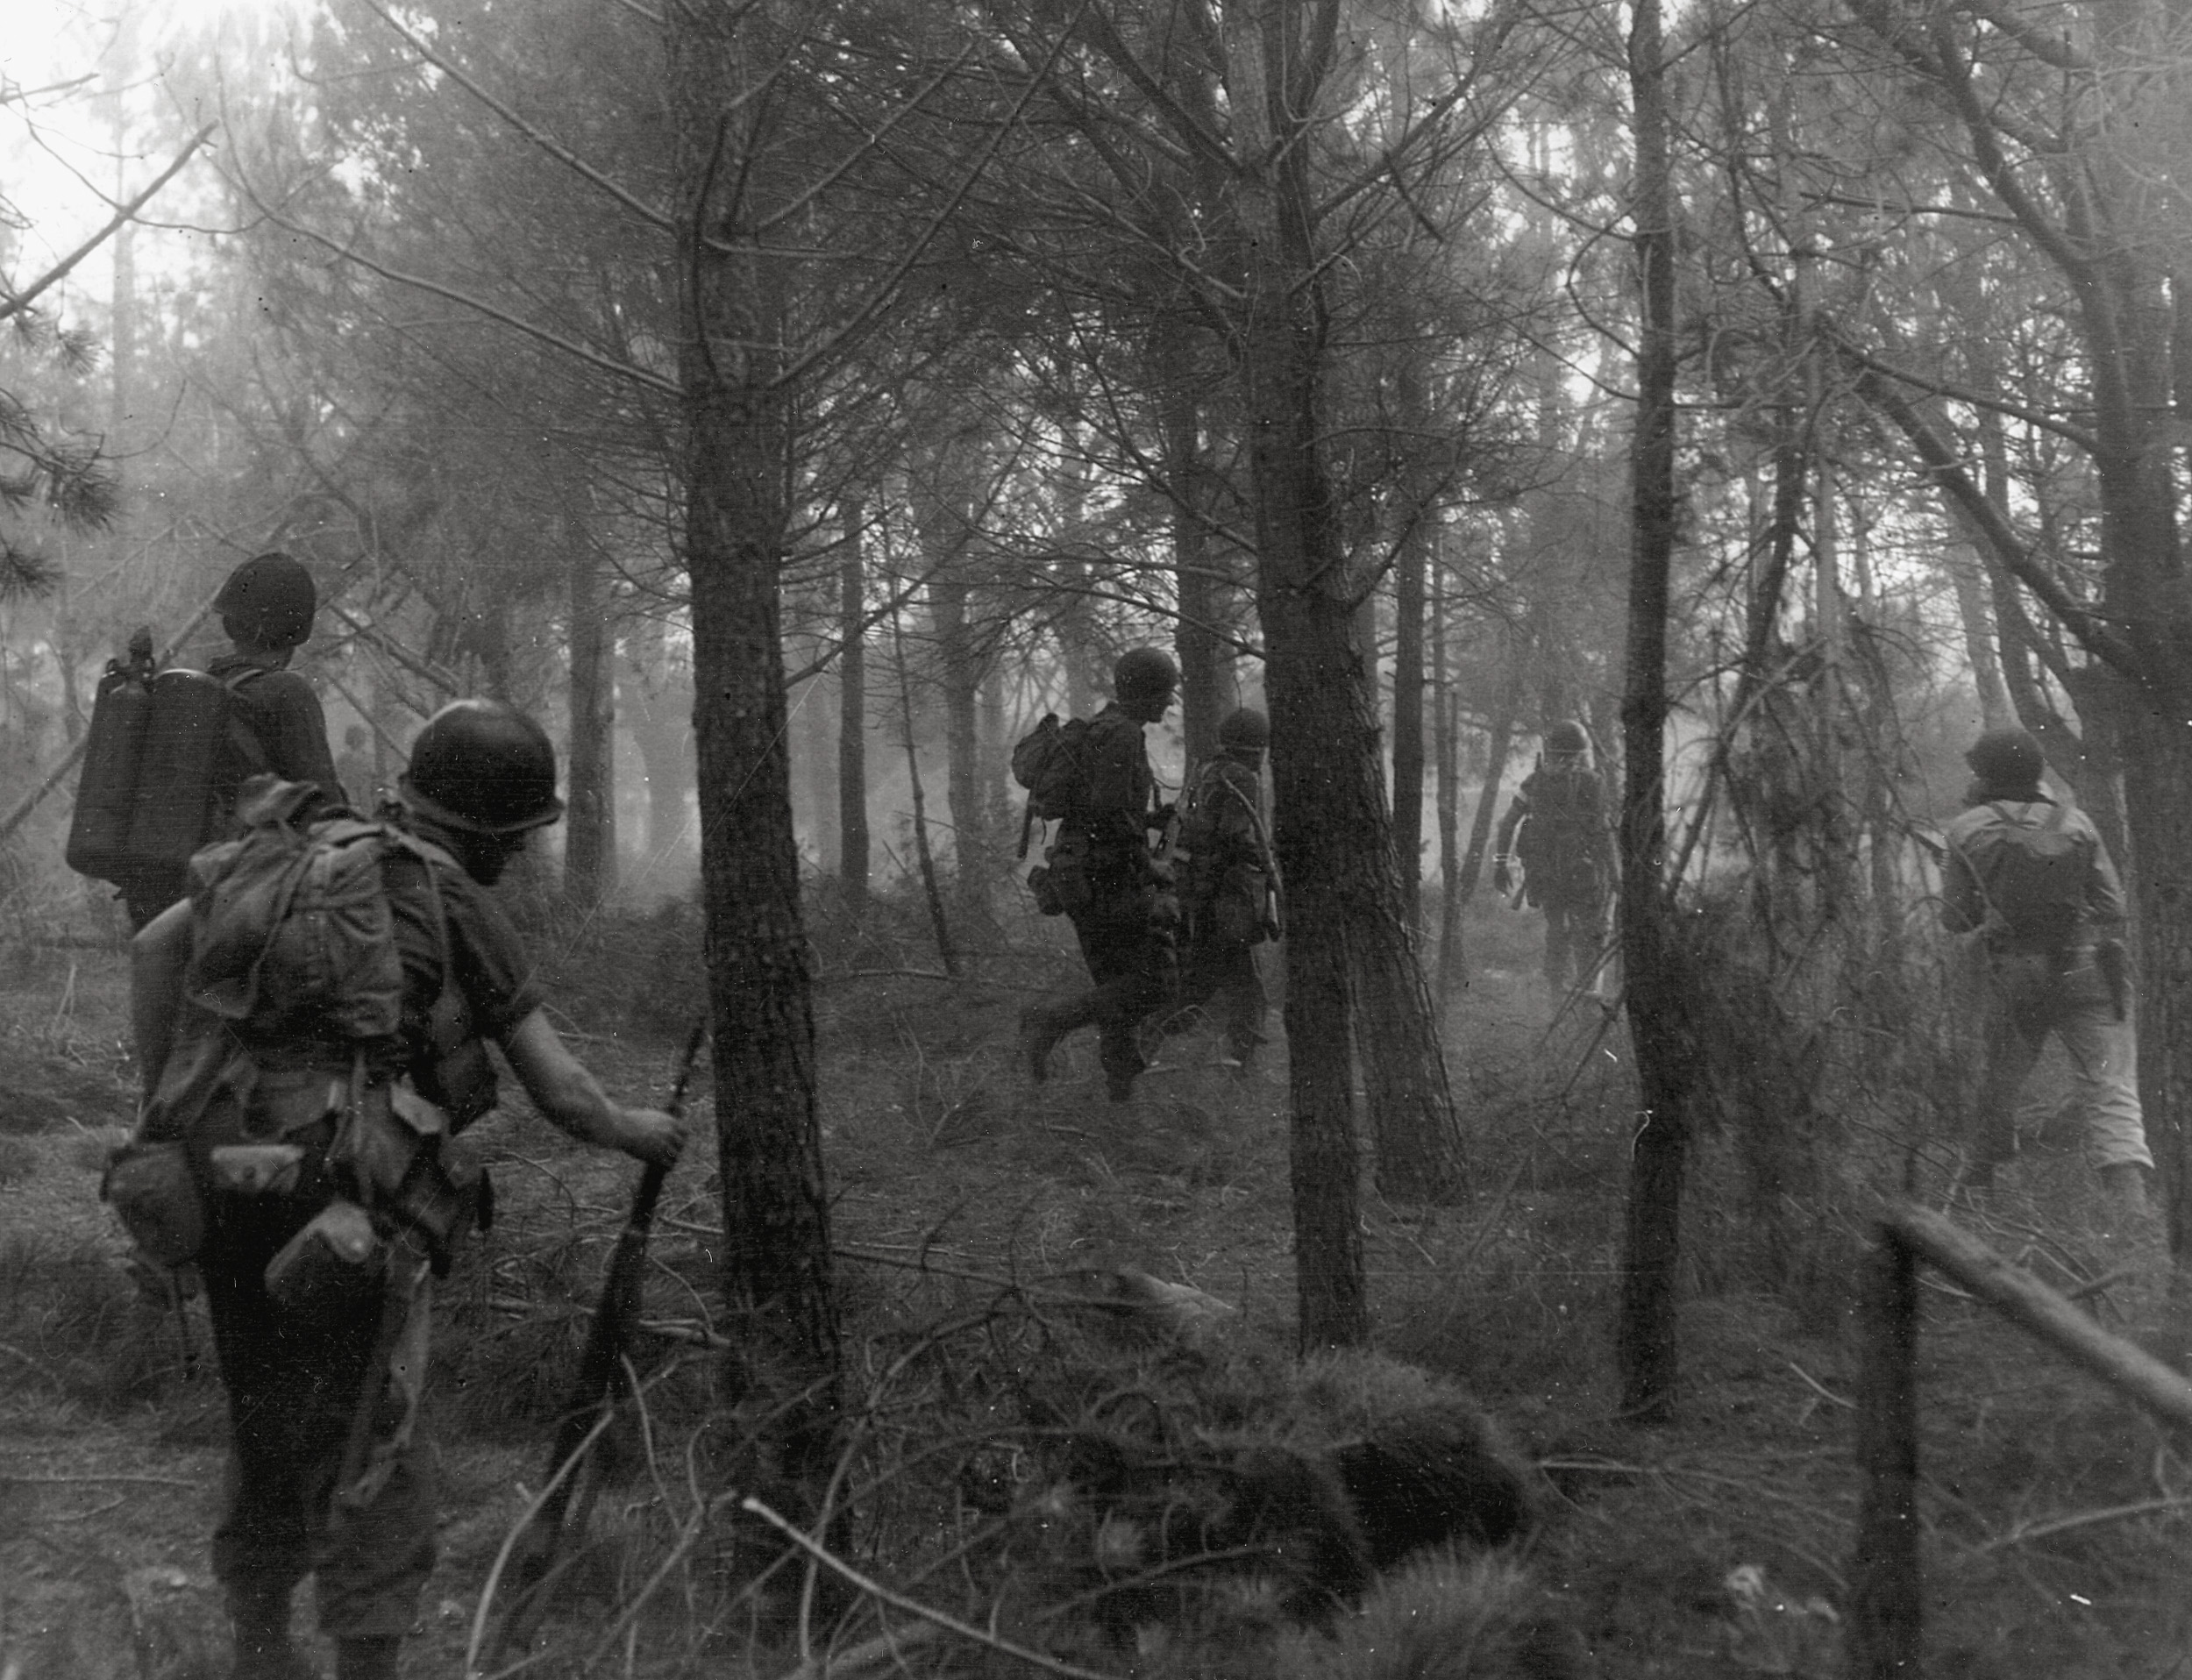 Making their way through a misty wood, U.S. assault teams push inland in southern France.